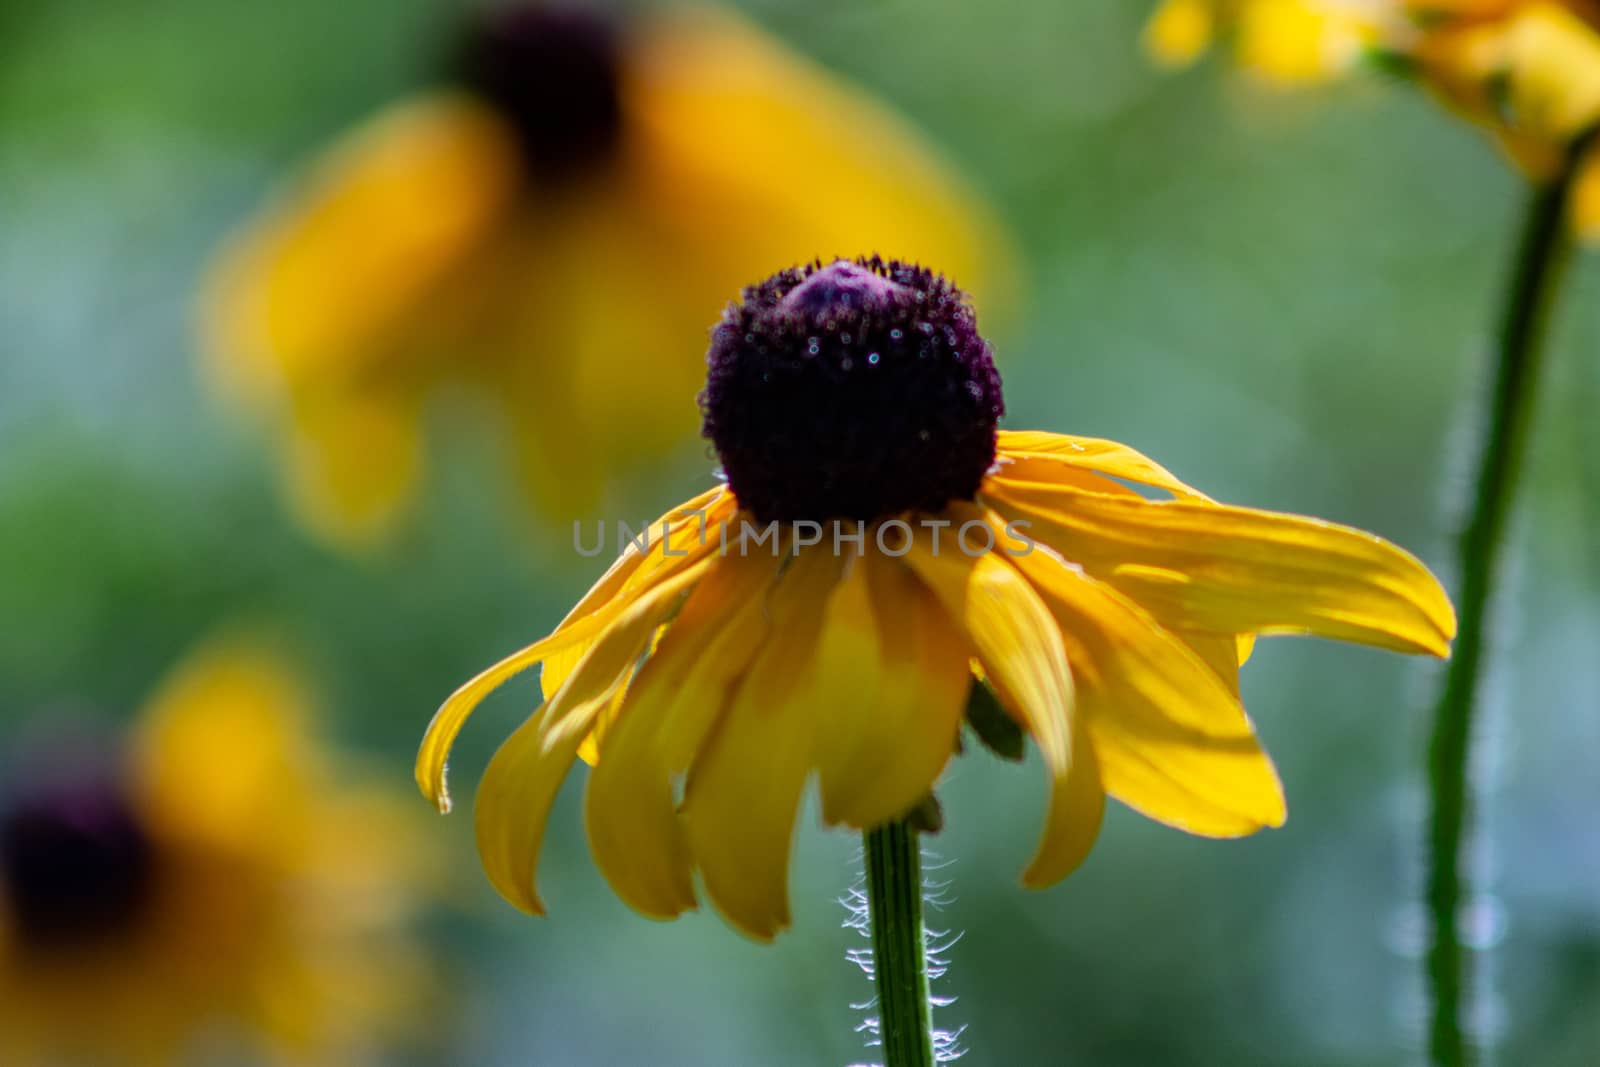 black eye susan wild flowers beautiful images perfect for magazine or website usage